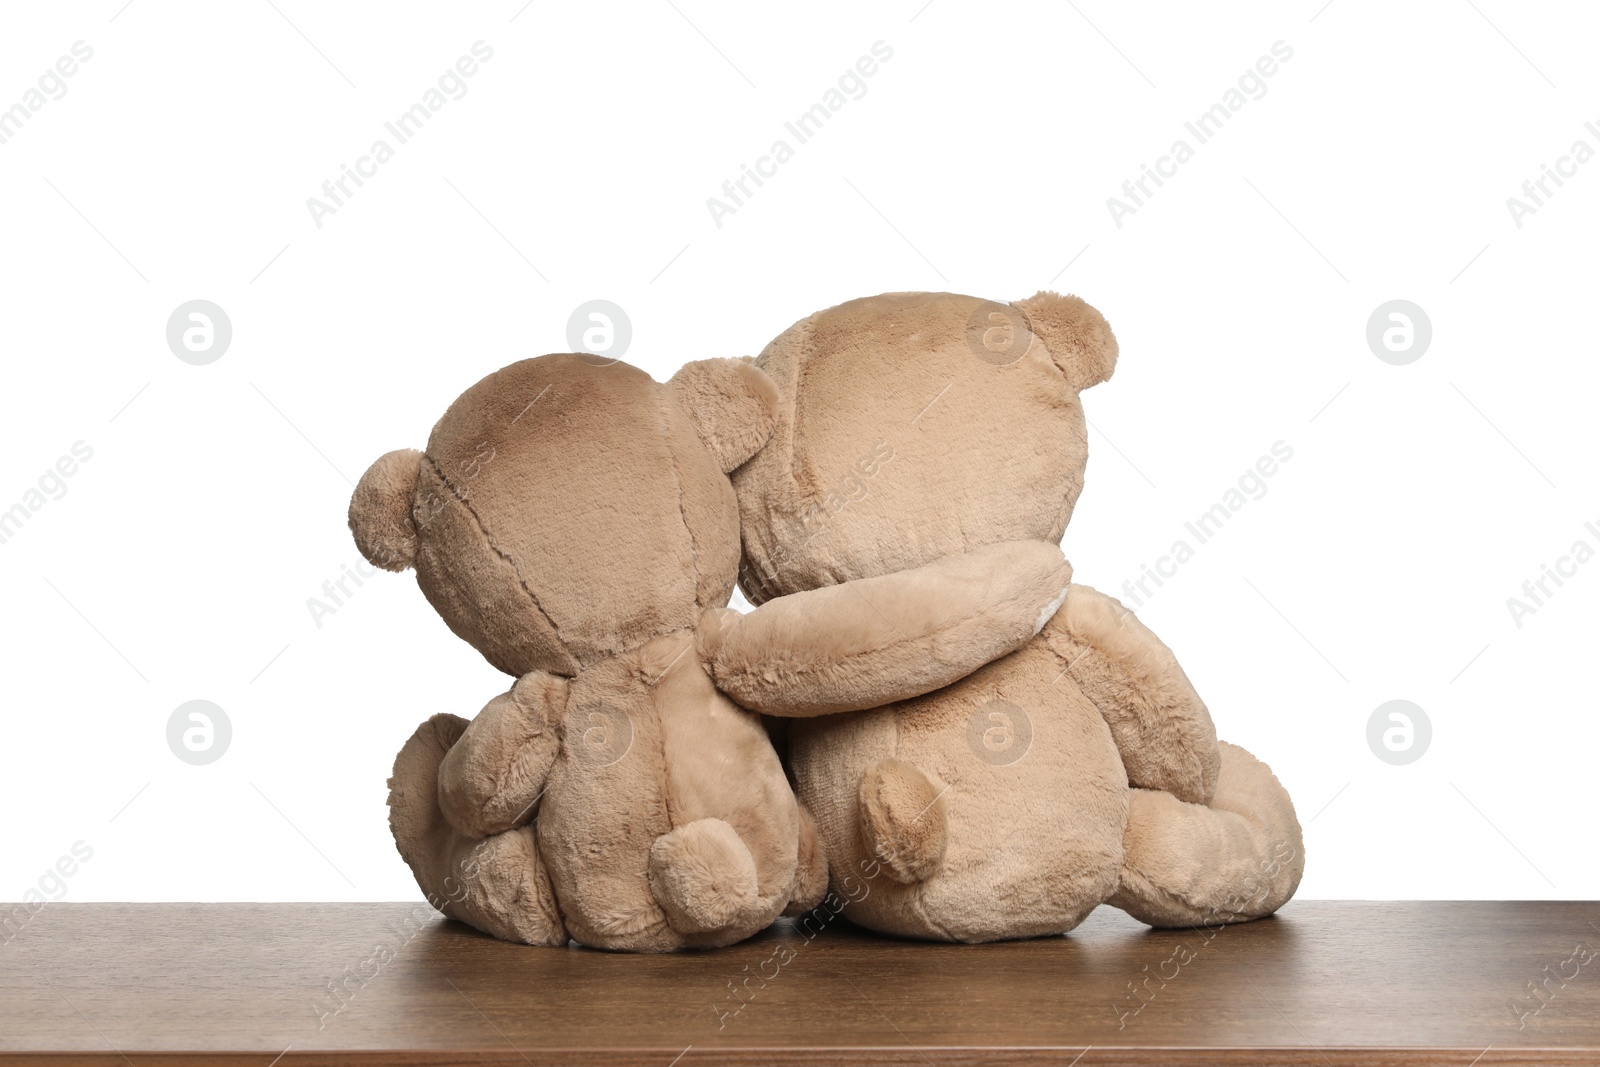 Photo of Cute teddy bears on wooden table against white background, back view